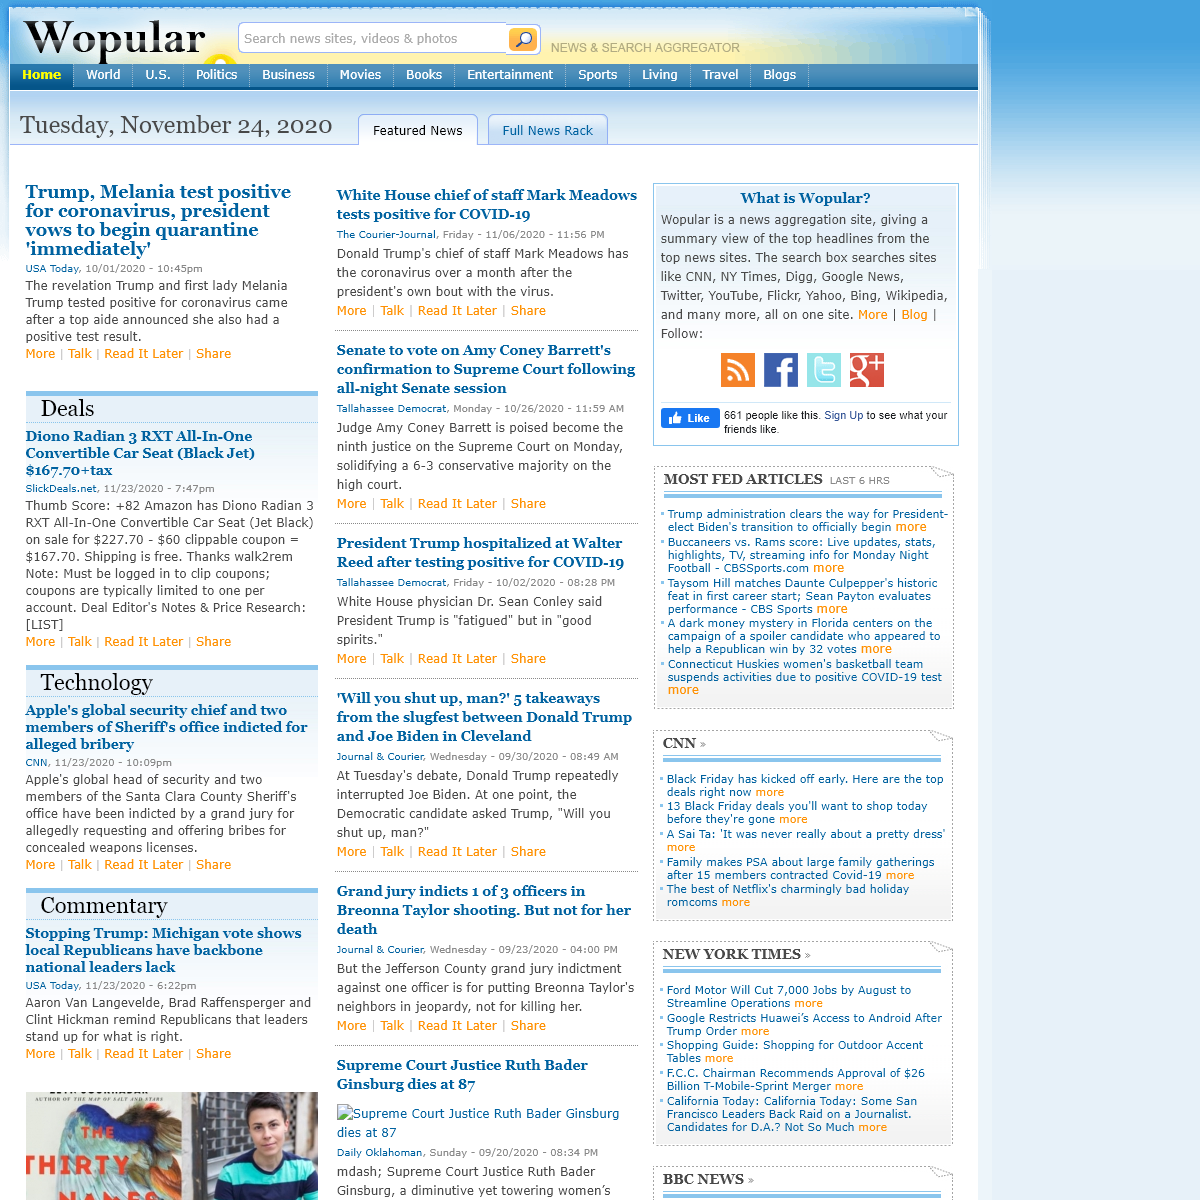 A complete backup of wopular.com